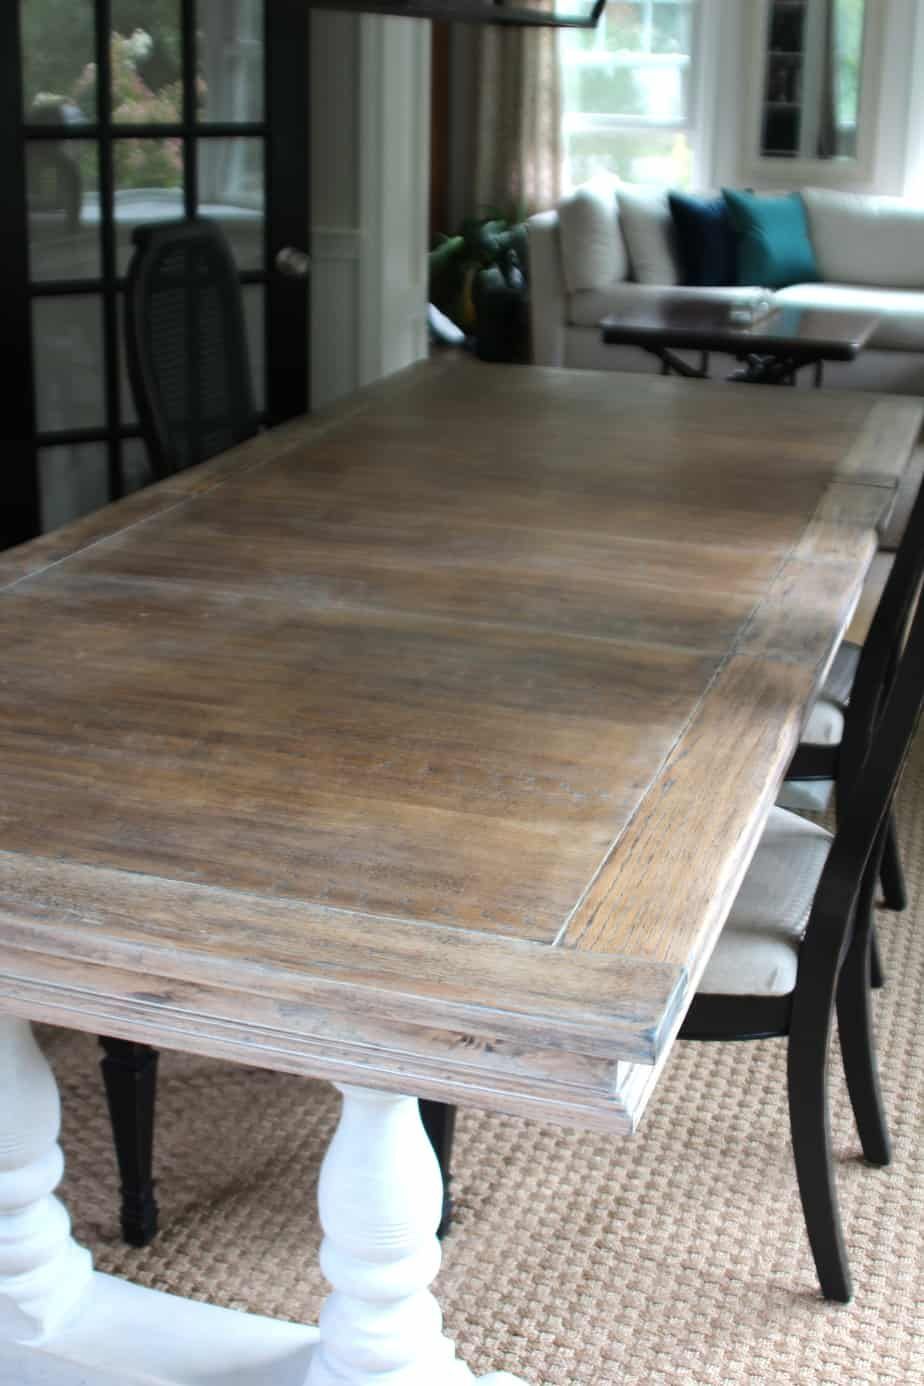 How To Lime A Dining Table - How To Lime A Dining Table -   15 diy Table refinishing ideas